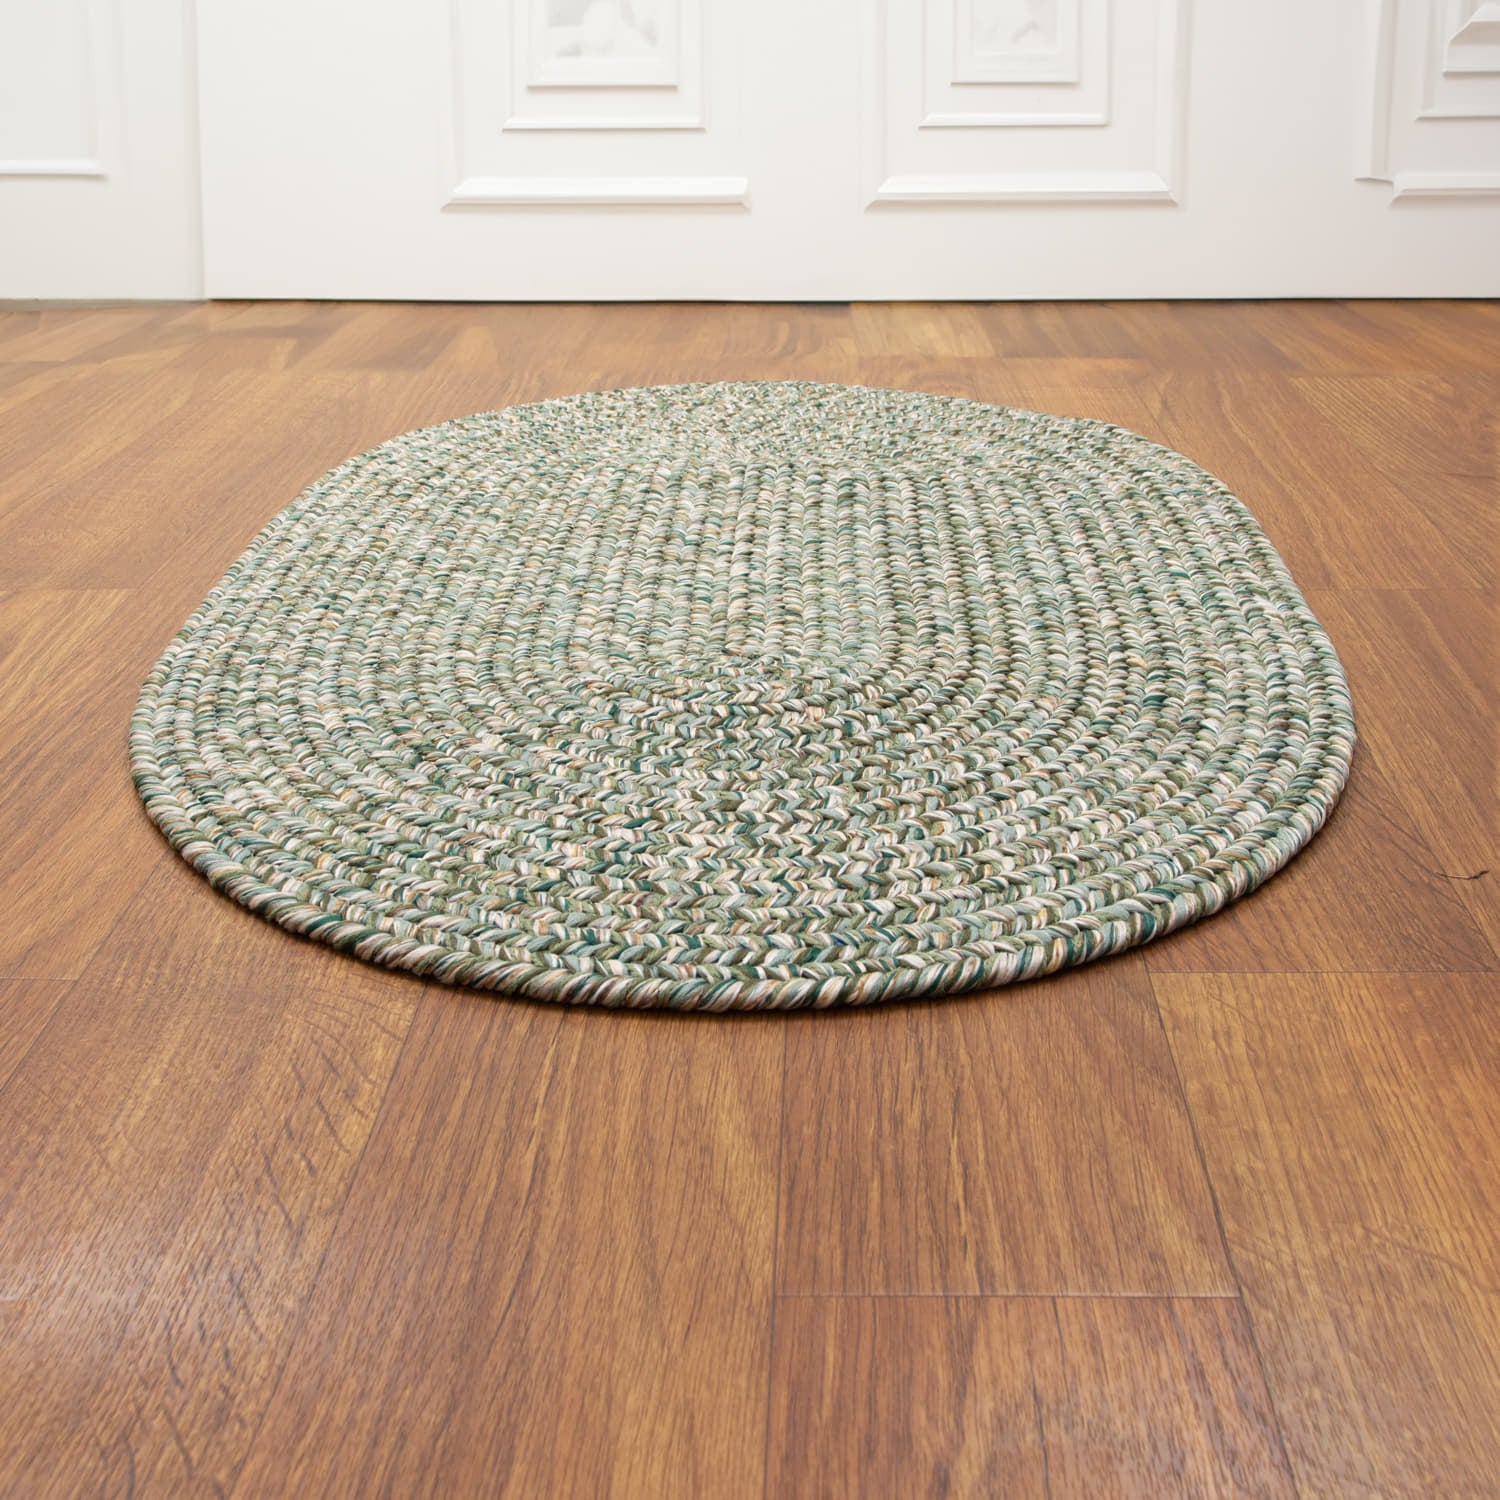 Oval Rug 100% Cotton Natural braided reversible Rug modern living rustic  rugs